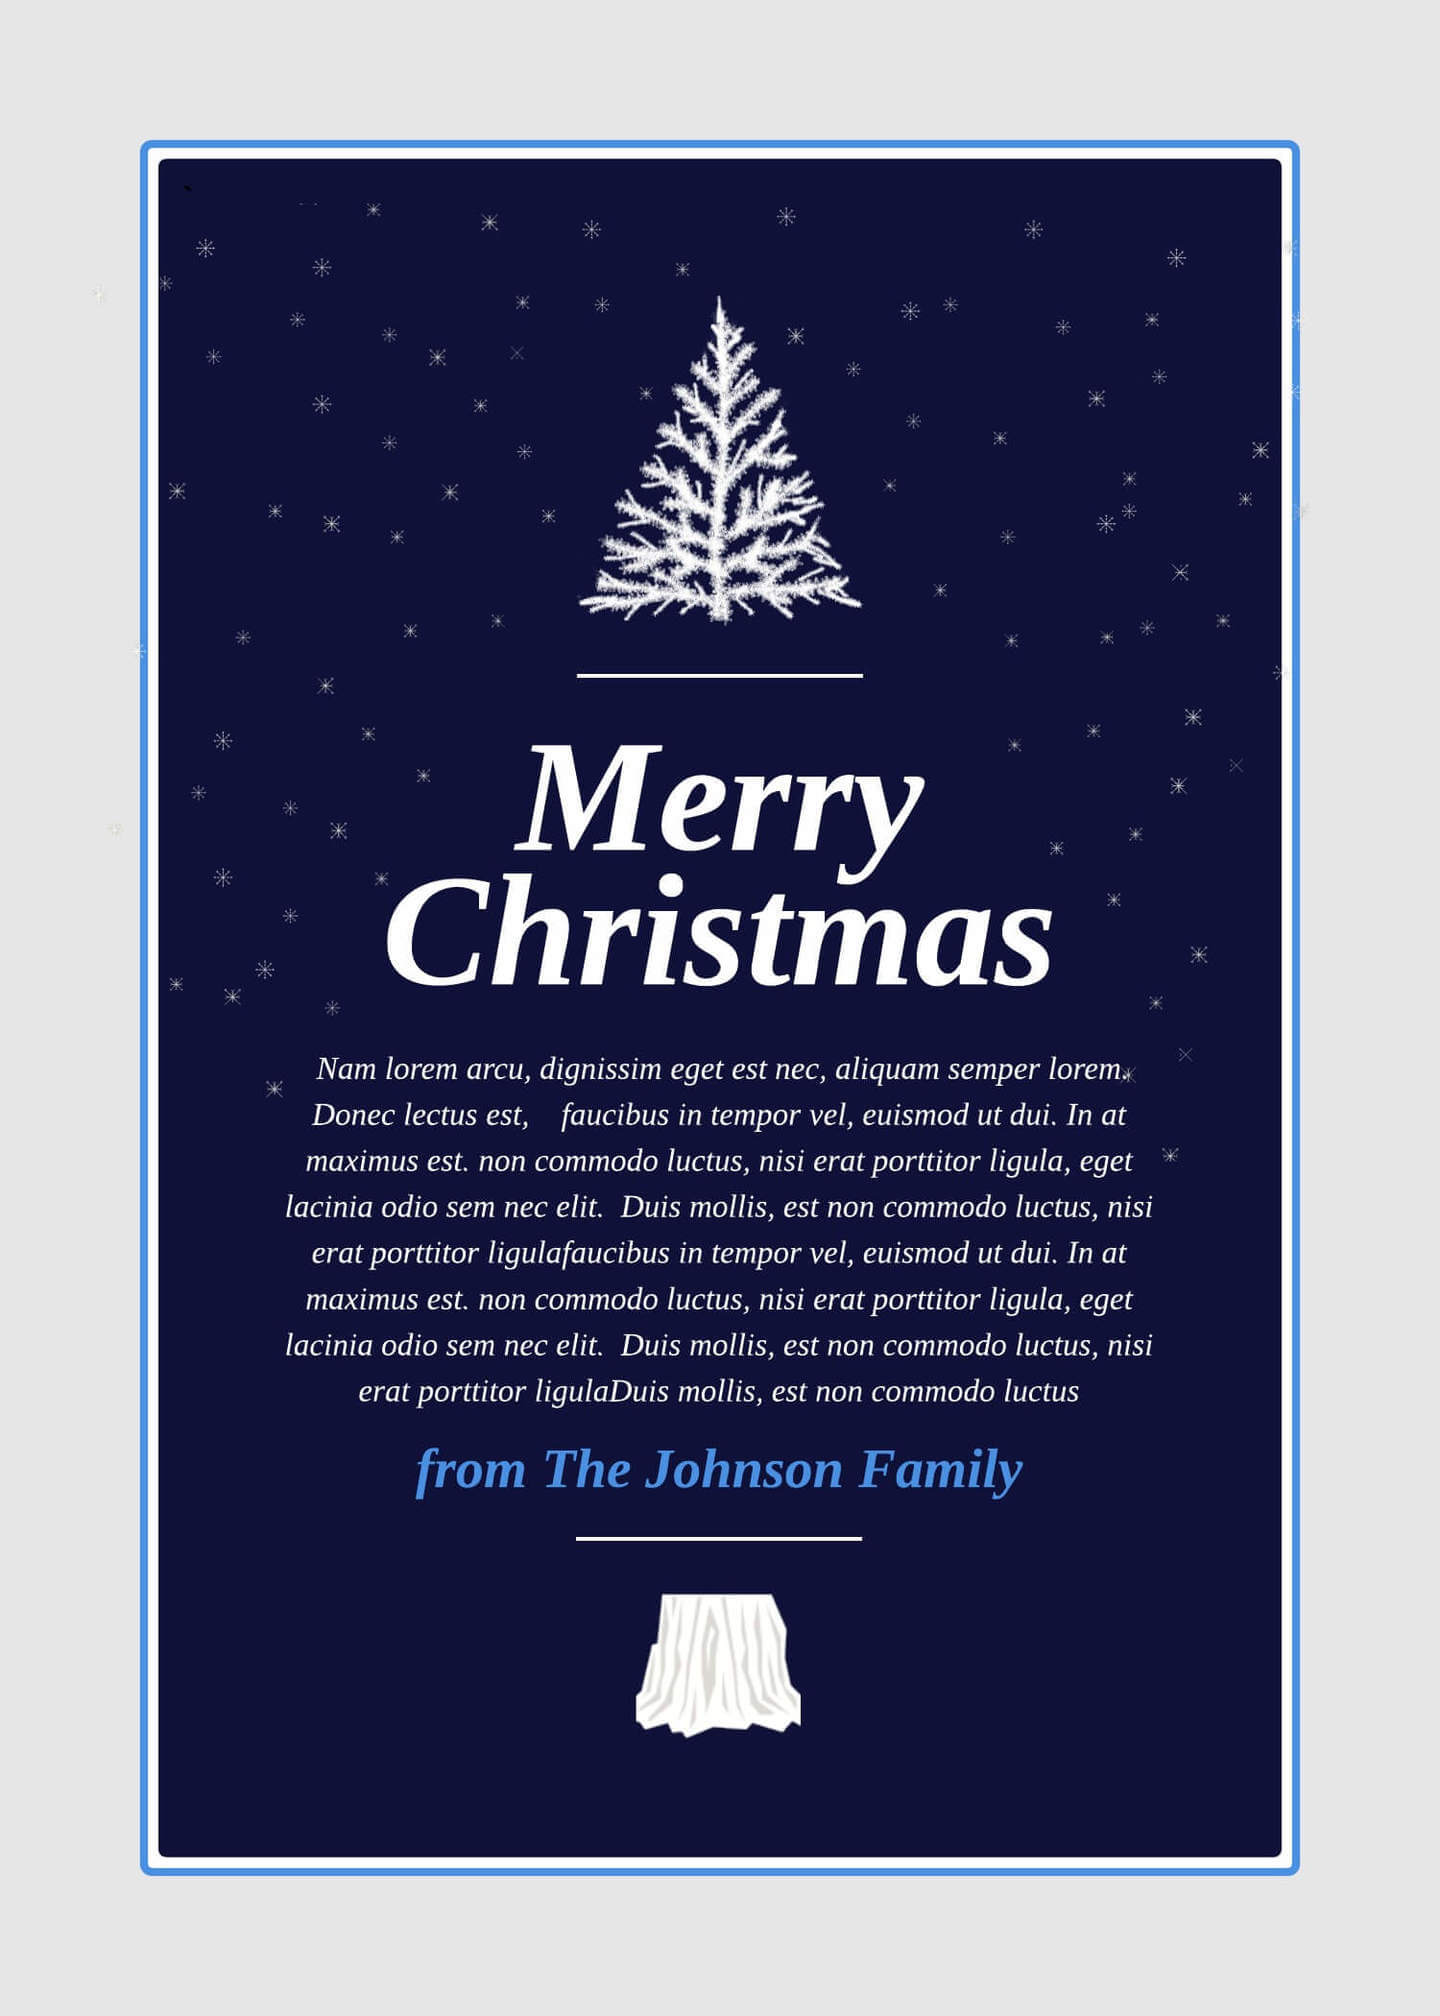 18 Free Card Templates & Examples – Lucidpress Pertaining To Free Holiday Photo Card Templates